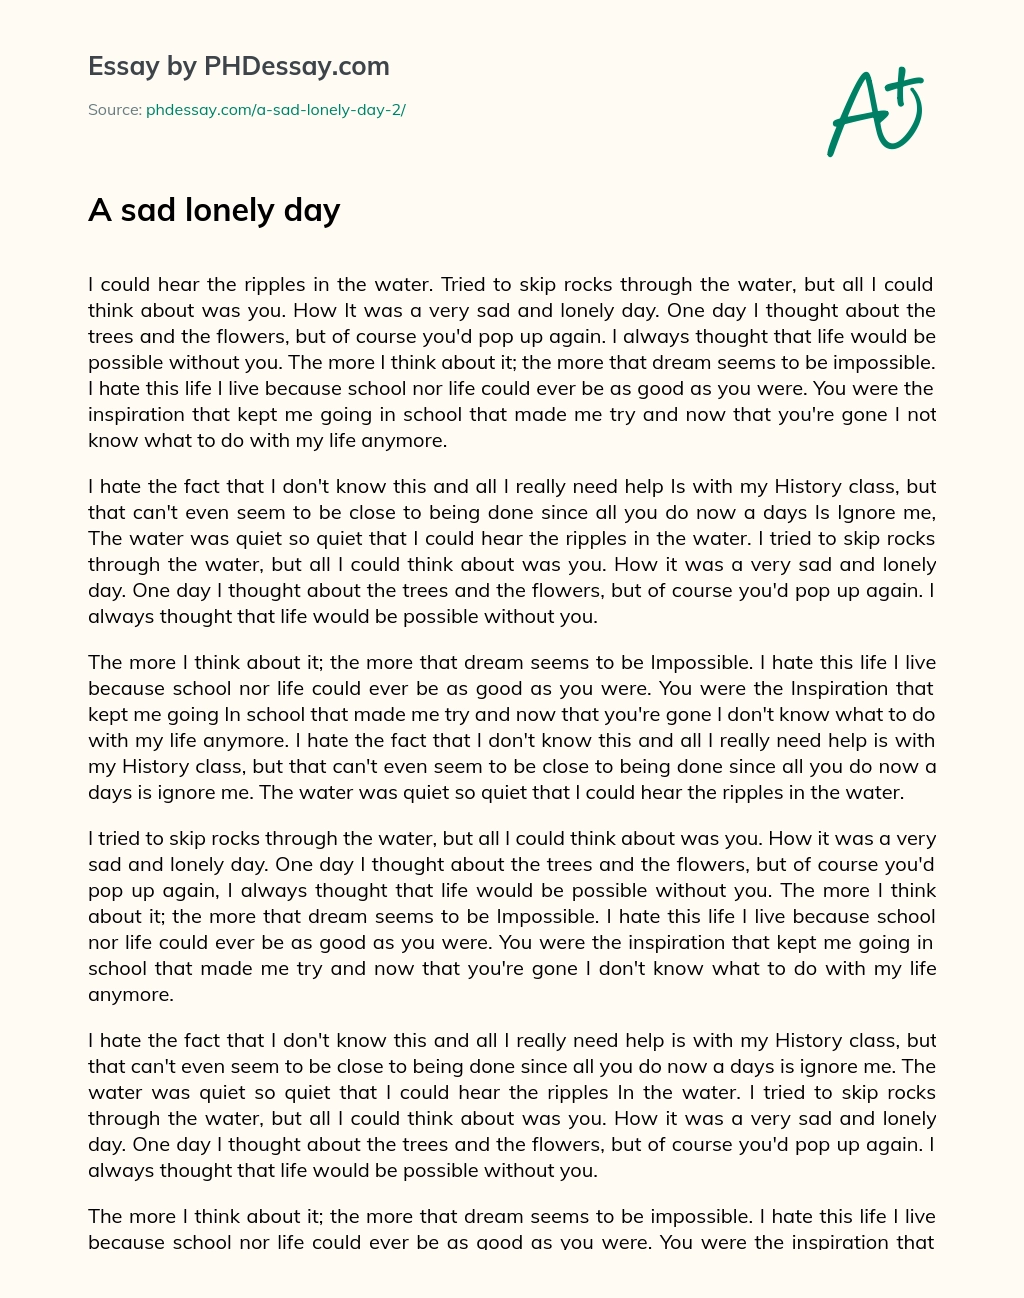 A sad lonely day essay